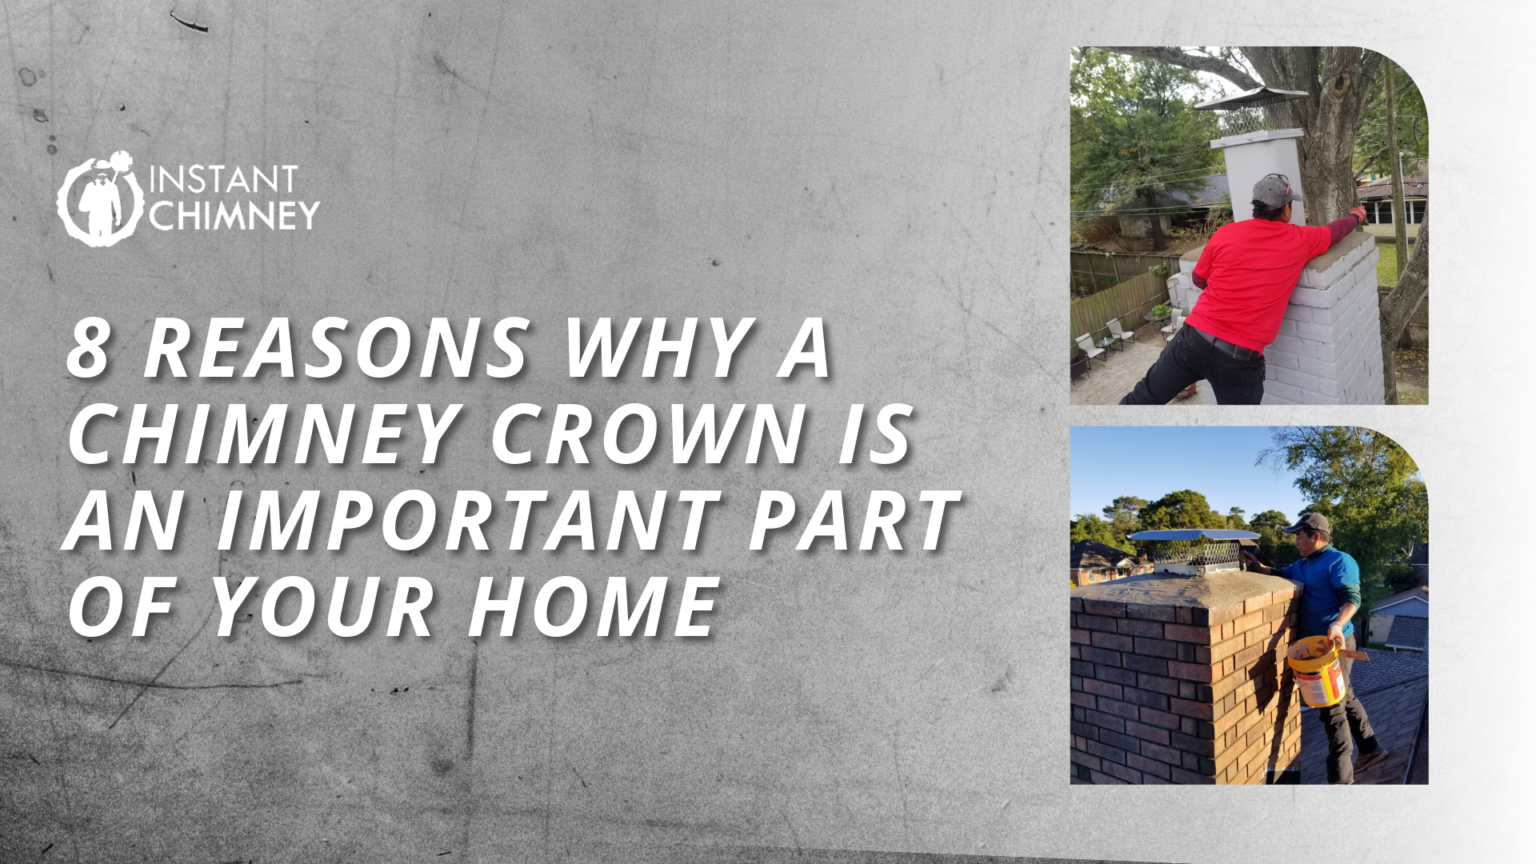 8 Reasons Why a Chimney Crown is an Important Part of Your Home